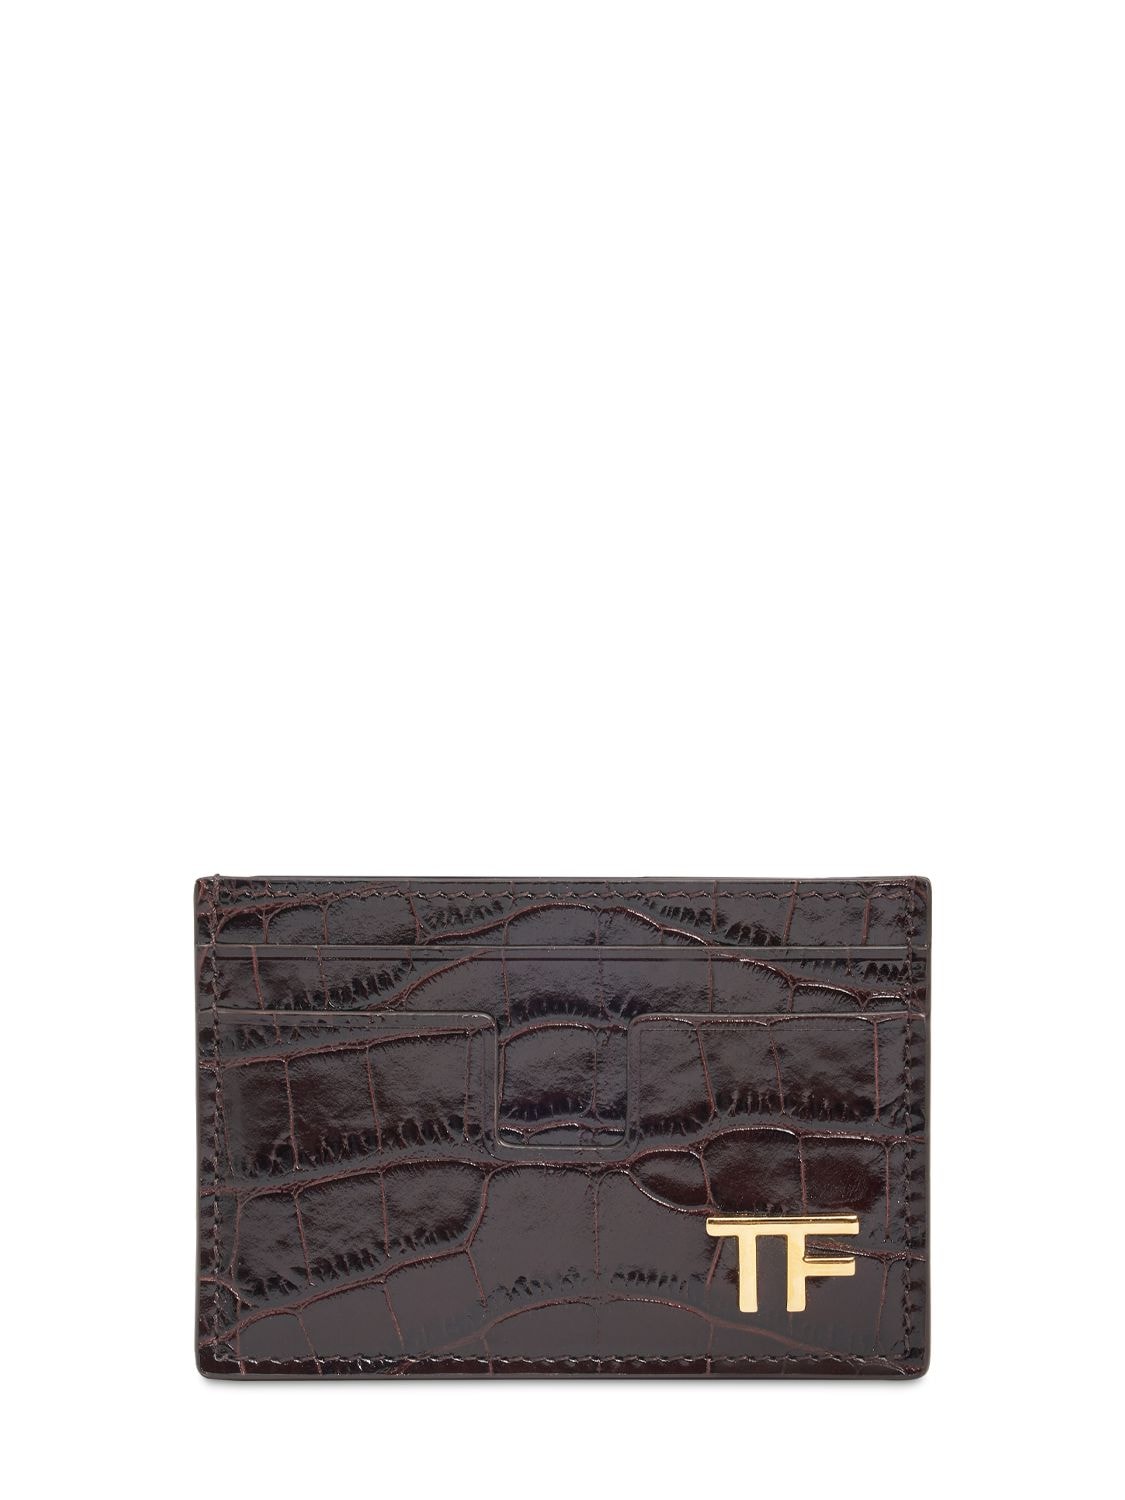 Tom Ford Shiny Croc Embossed Leather Card Holder In Espresso